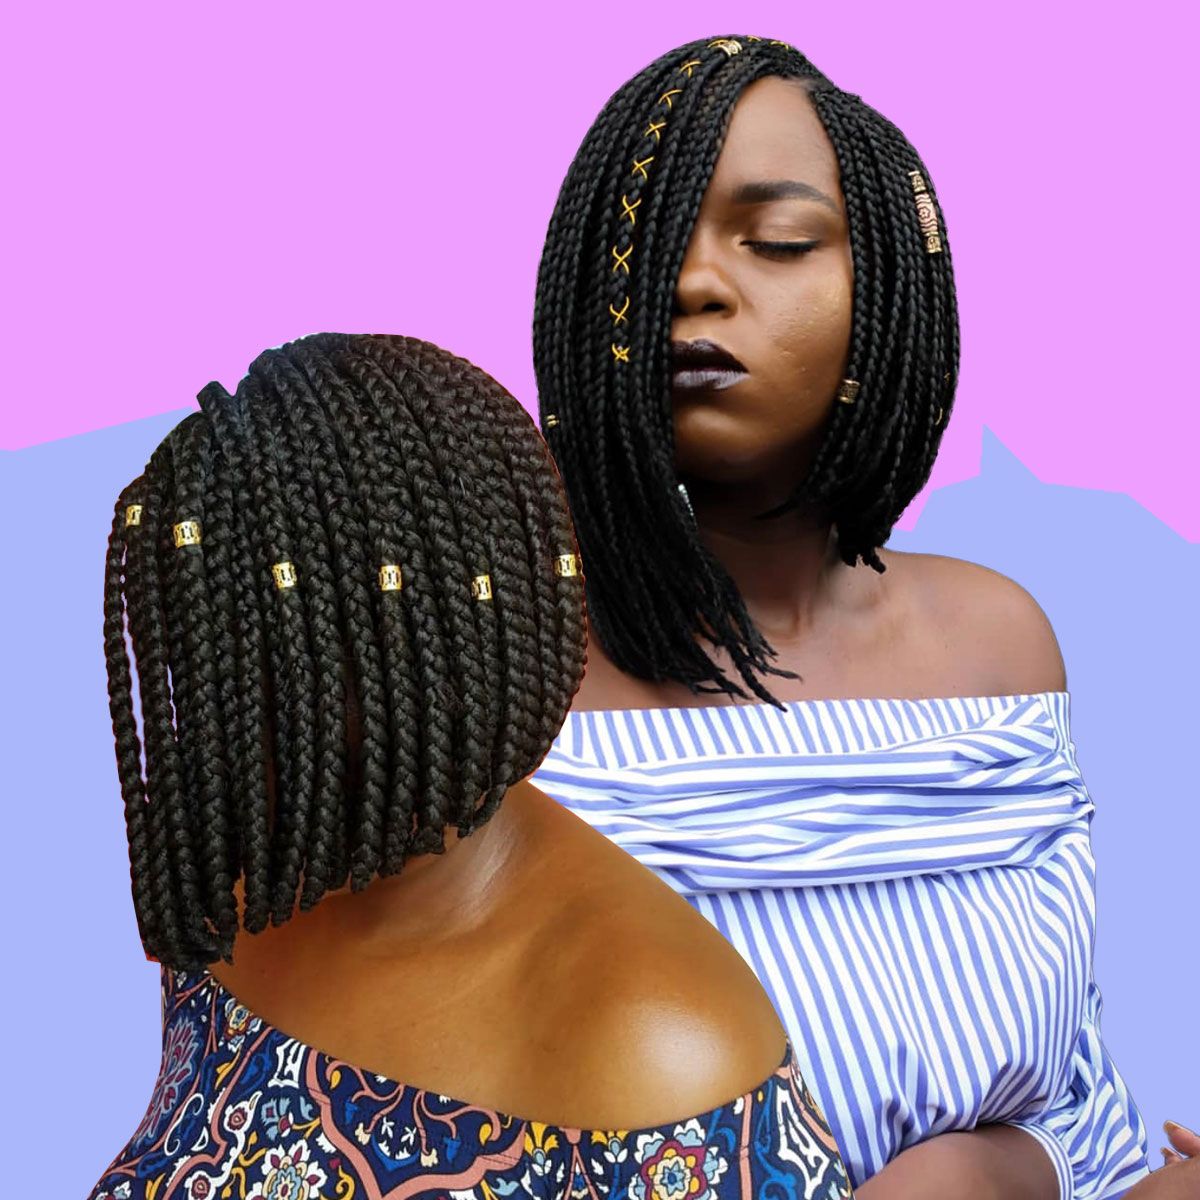 17 Beautiful Braided Bobs From Instagram You Need To Give A Try Within Most Recently Released Tiny Braid Hairstyles In Crop (View 18 of 20)